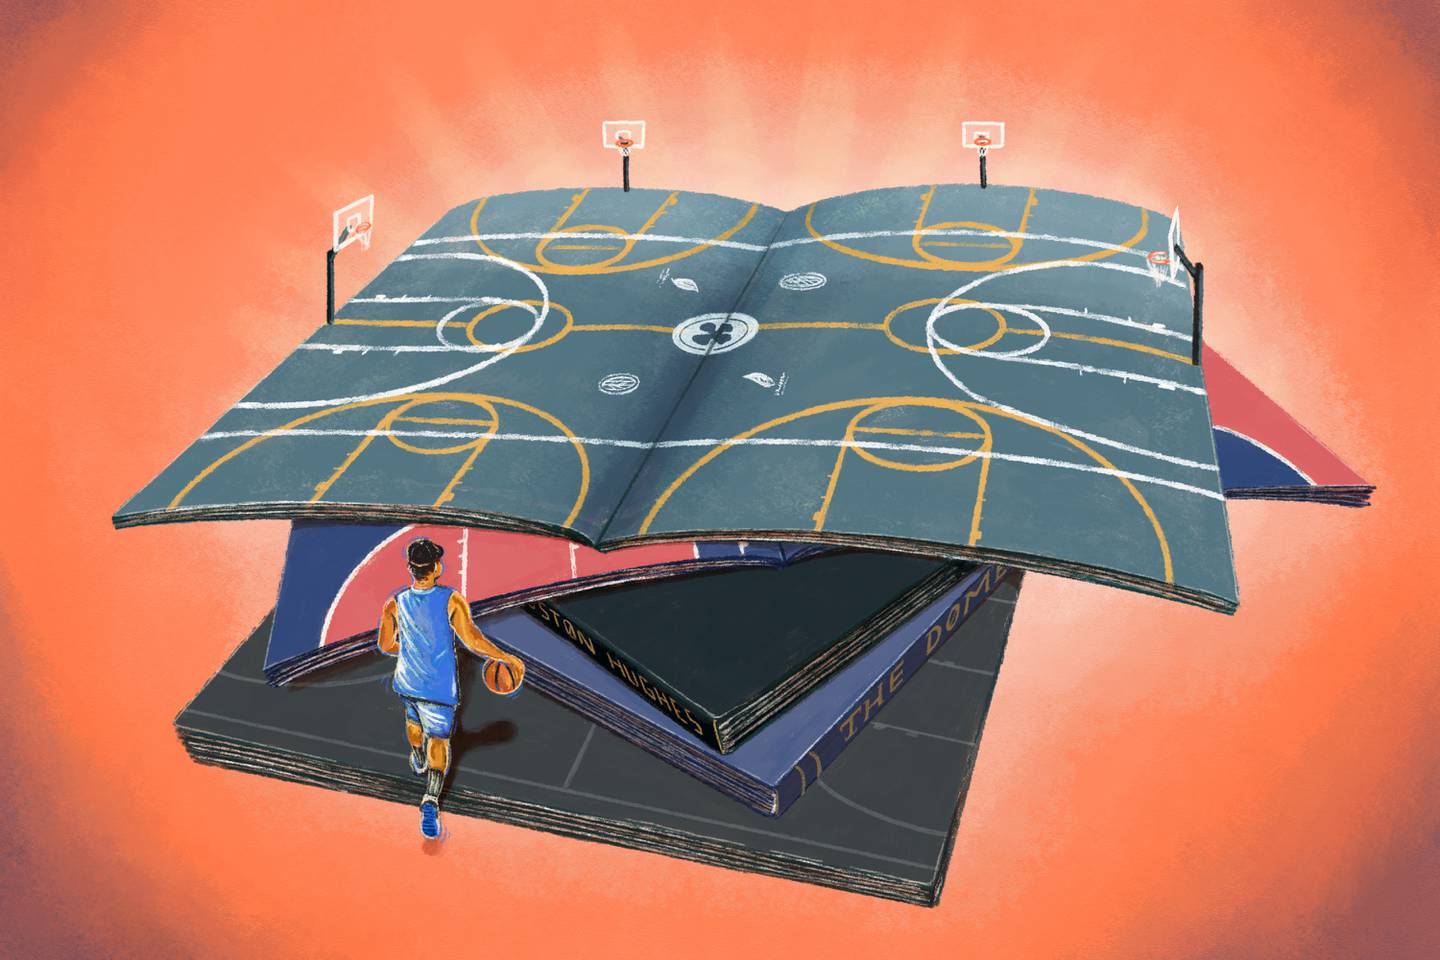 Five basketball courts that influenced poet Wallace Lane.